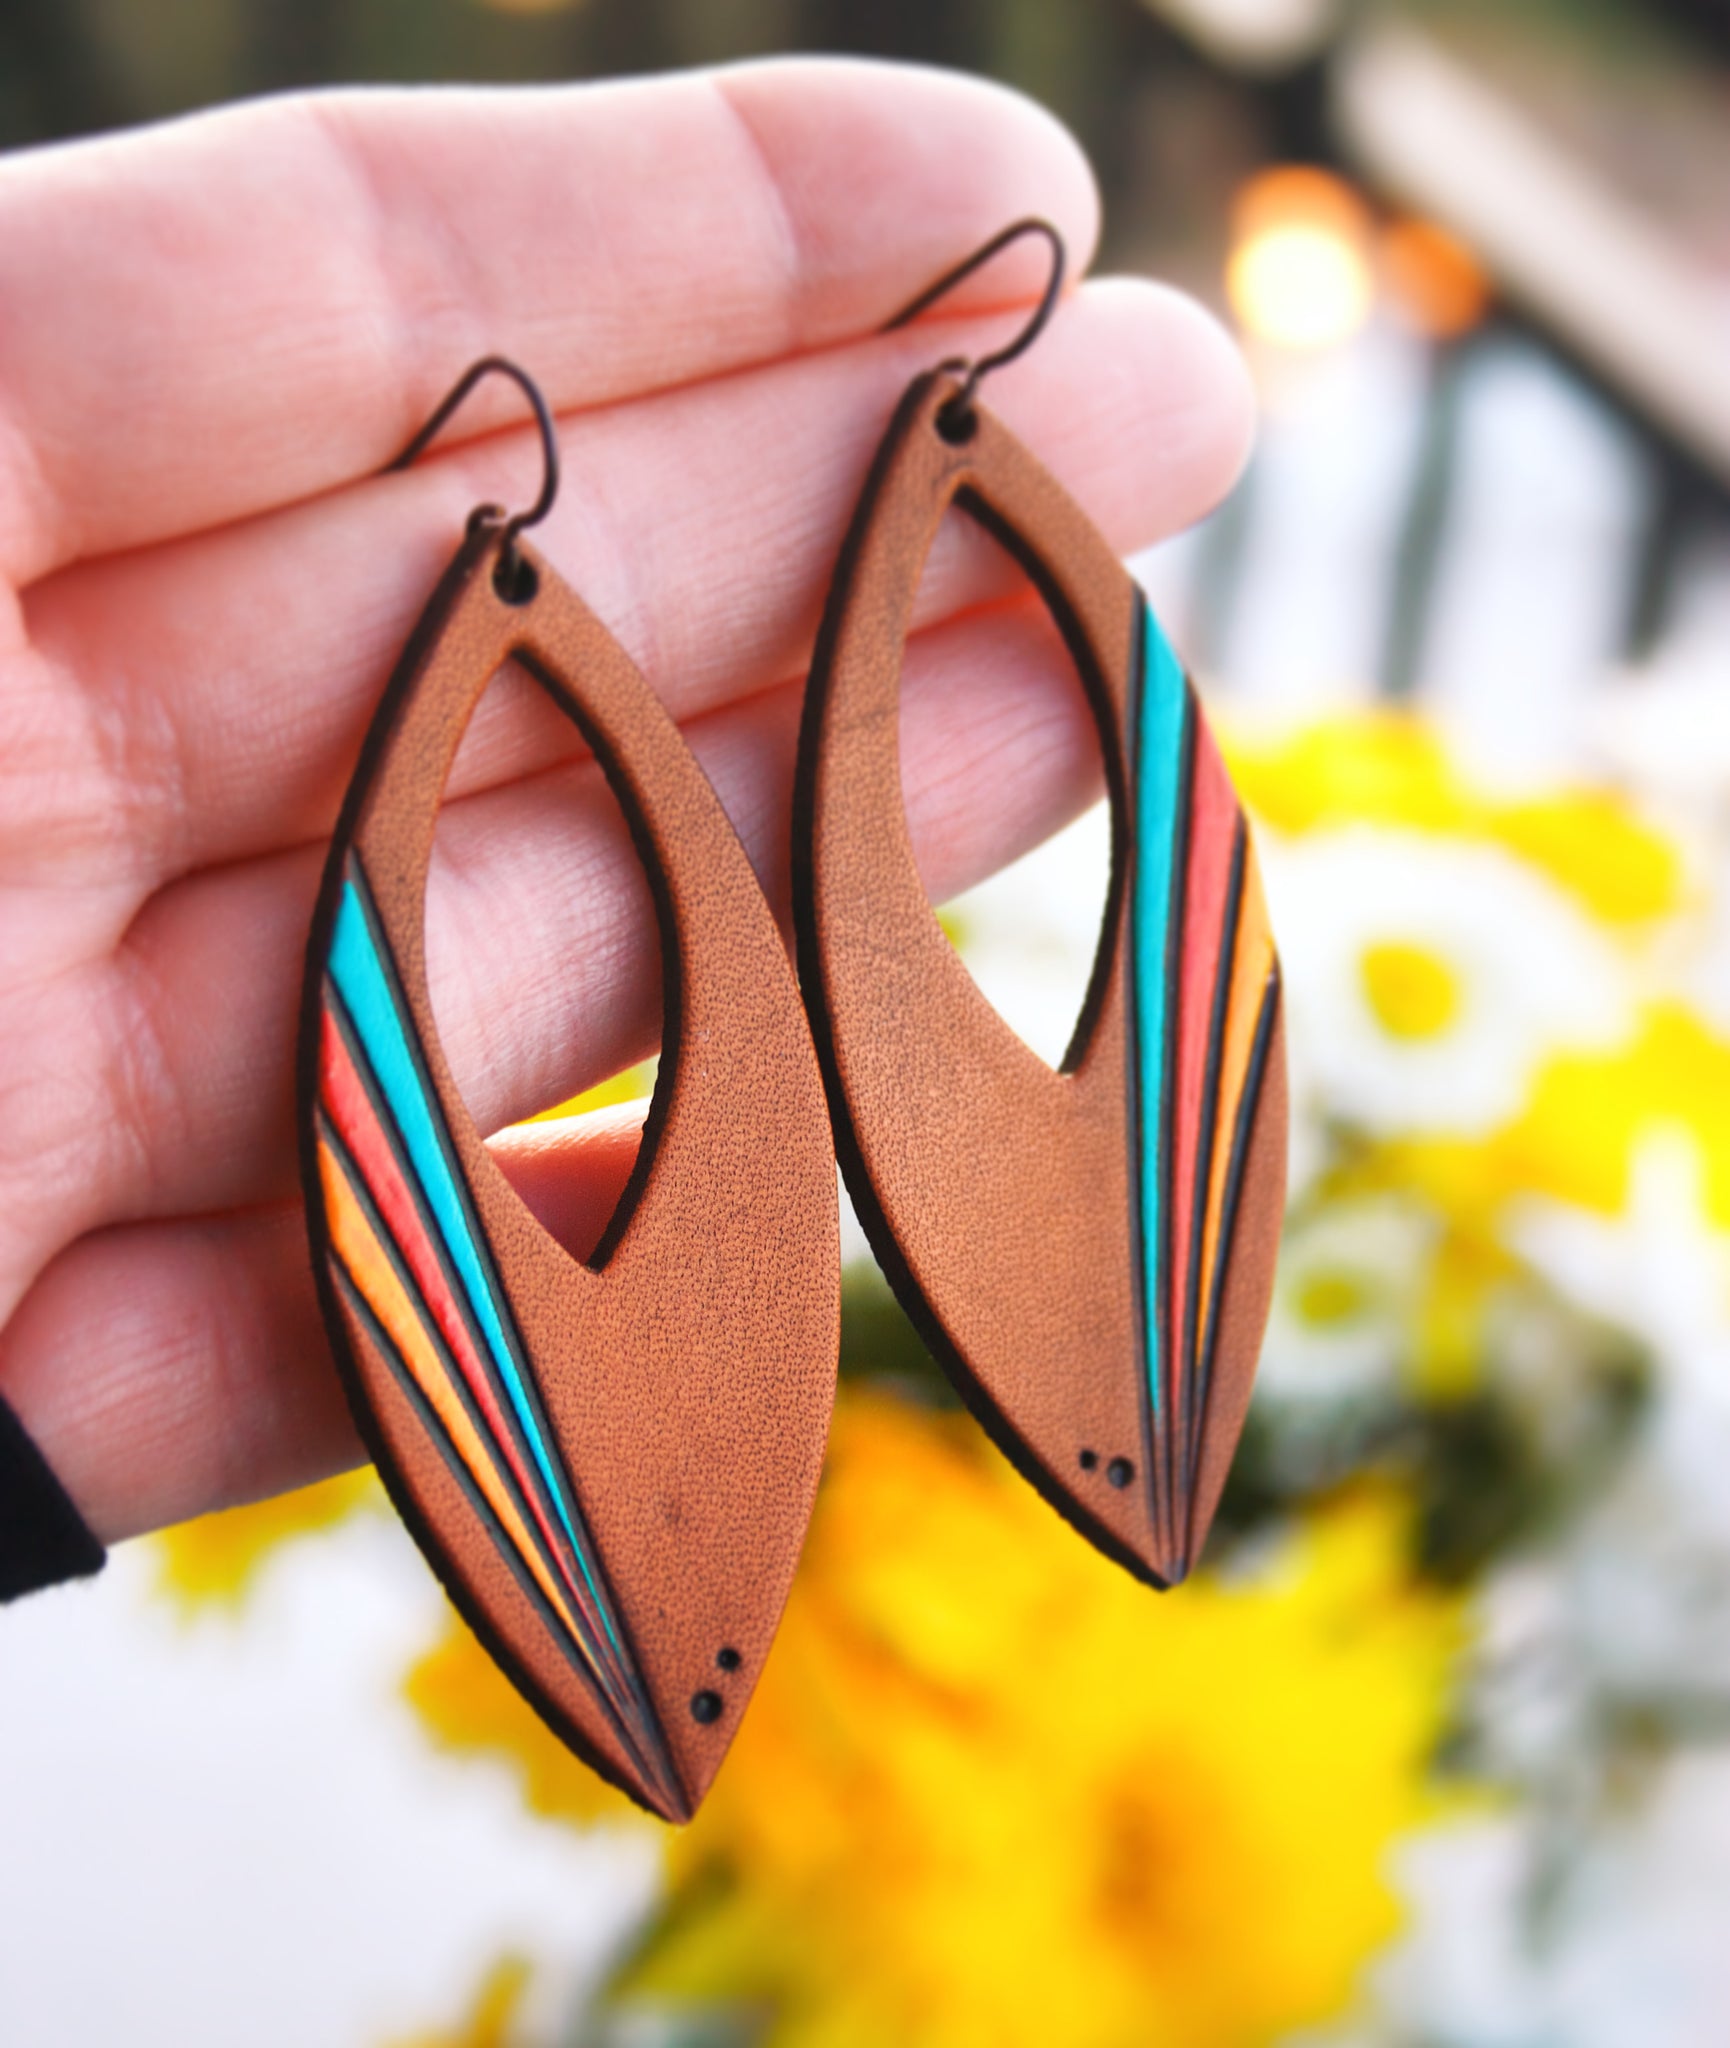 Reserved for Tina - Ventura Highway painted leather earrings